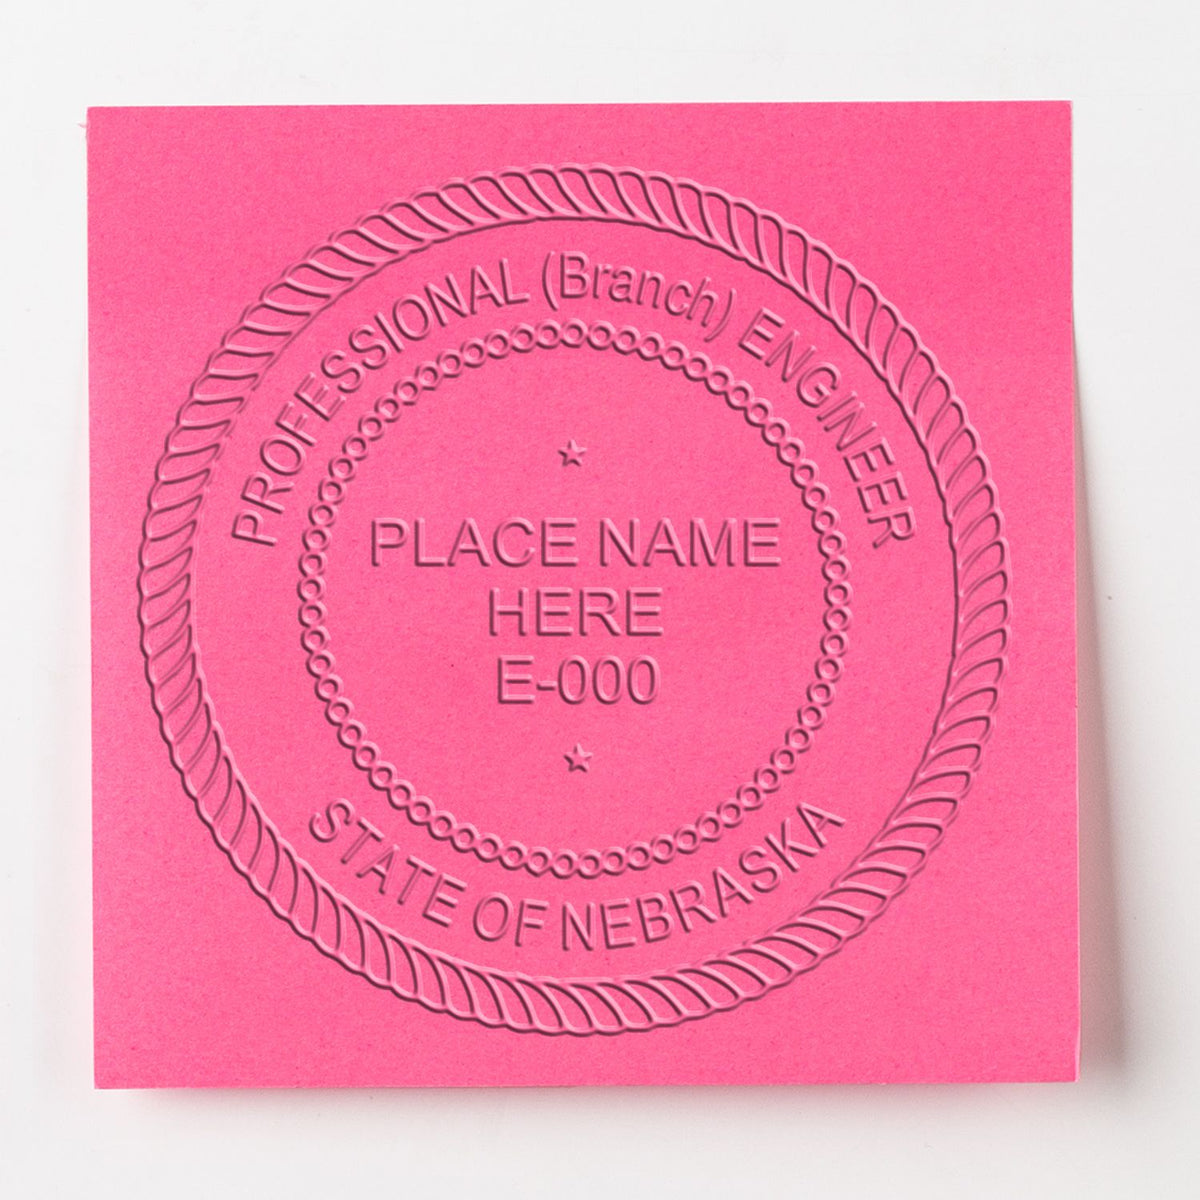 This paper is stamped with a sample imprint of the Nebraska Engineer Desk Seal, signifying its quality and reliability.